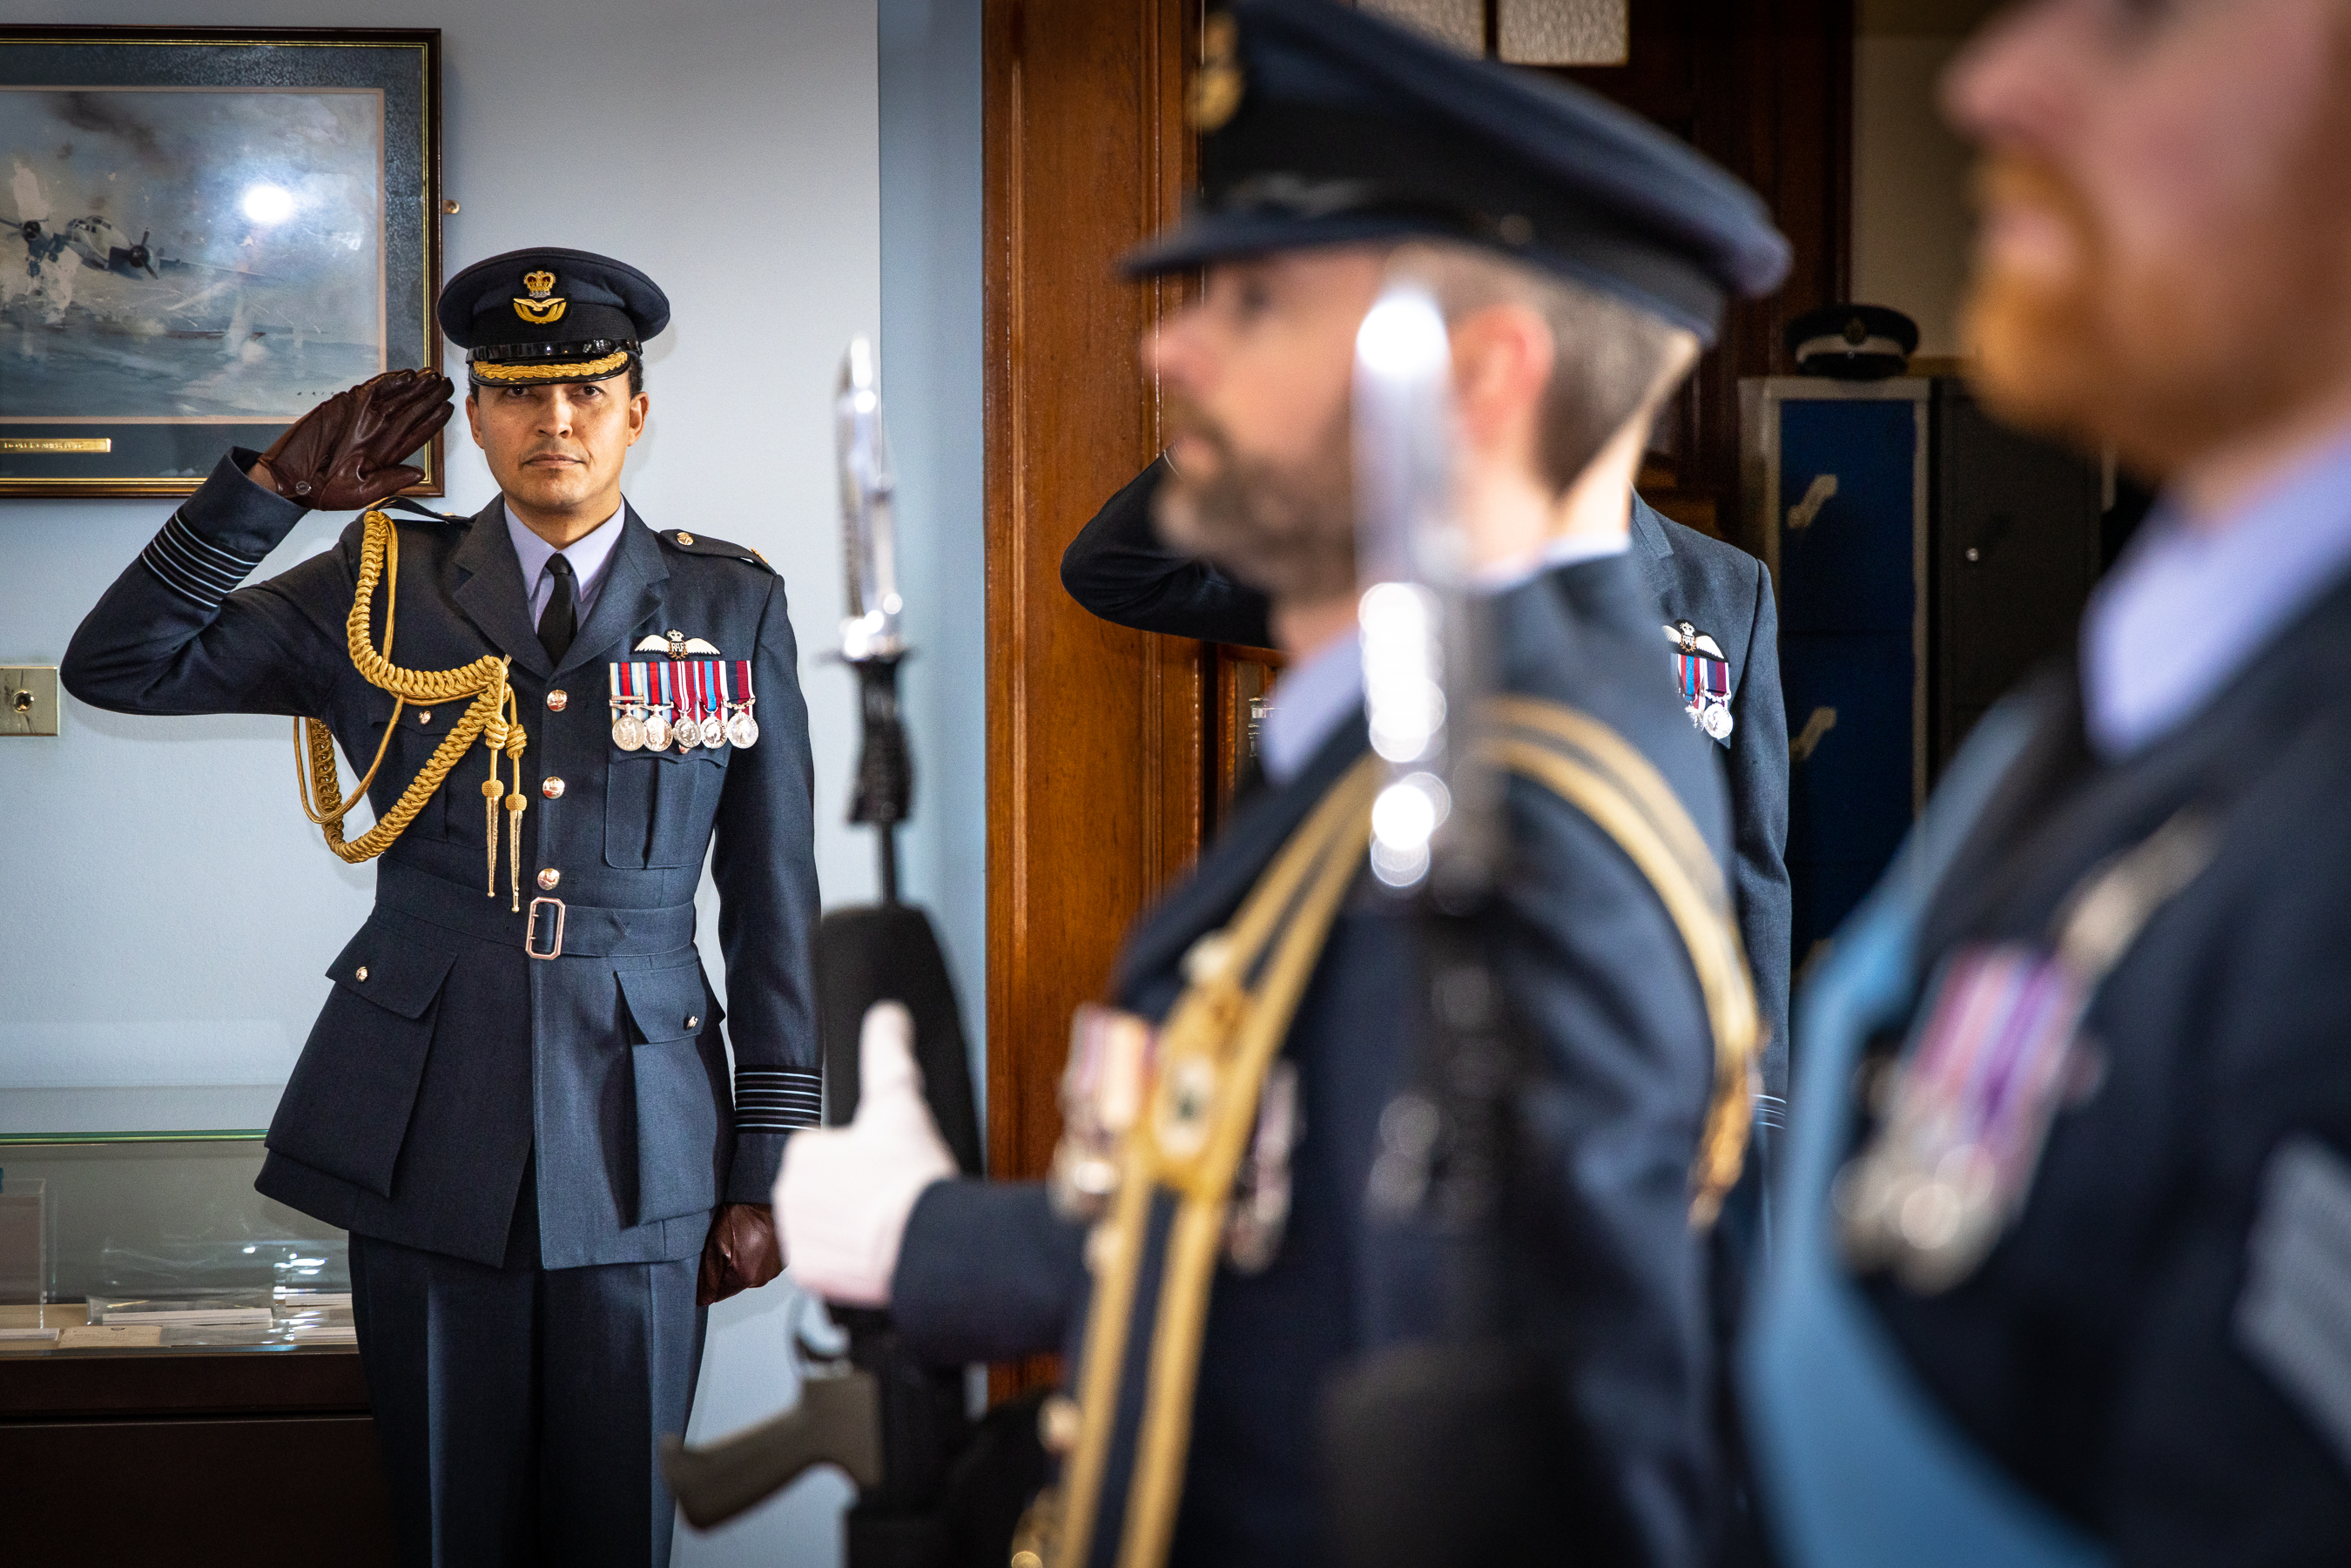 Image shows RAF aviators inside Officers' Mess during ceremony.